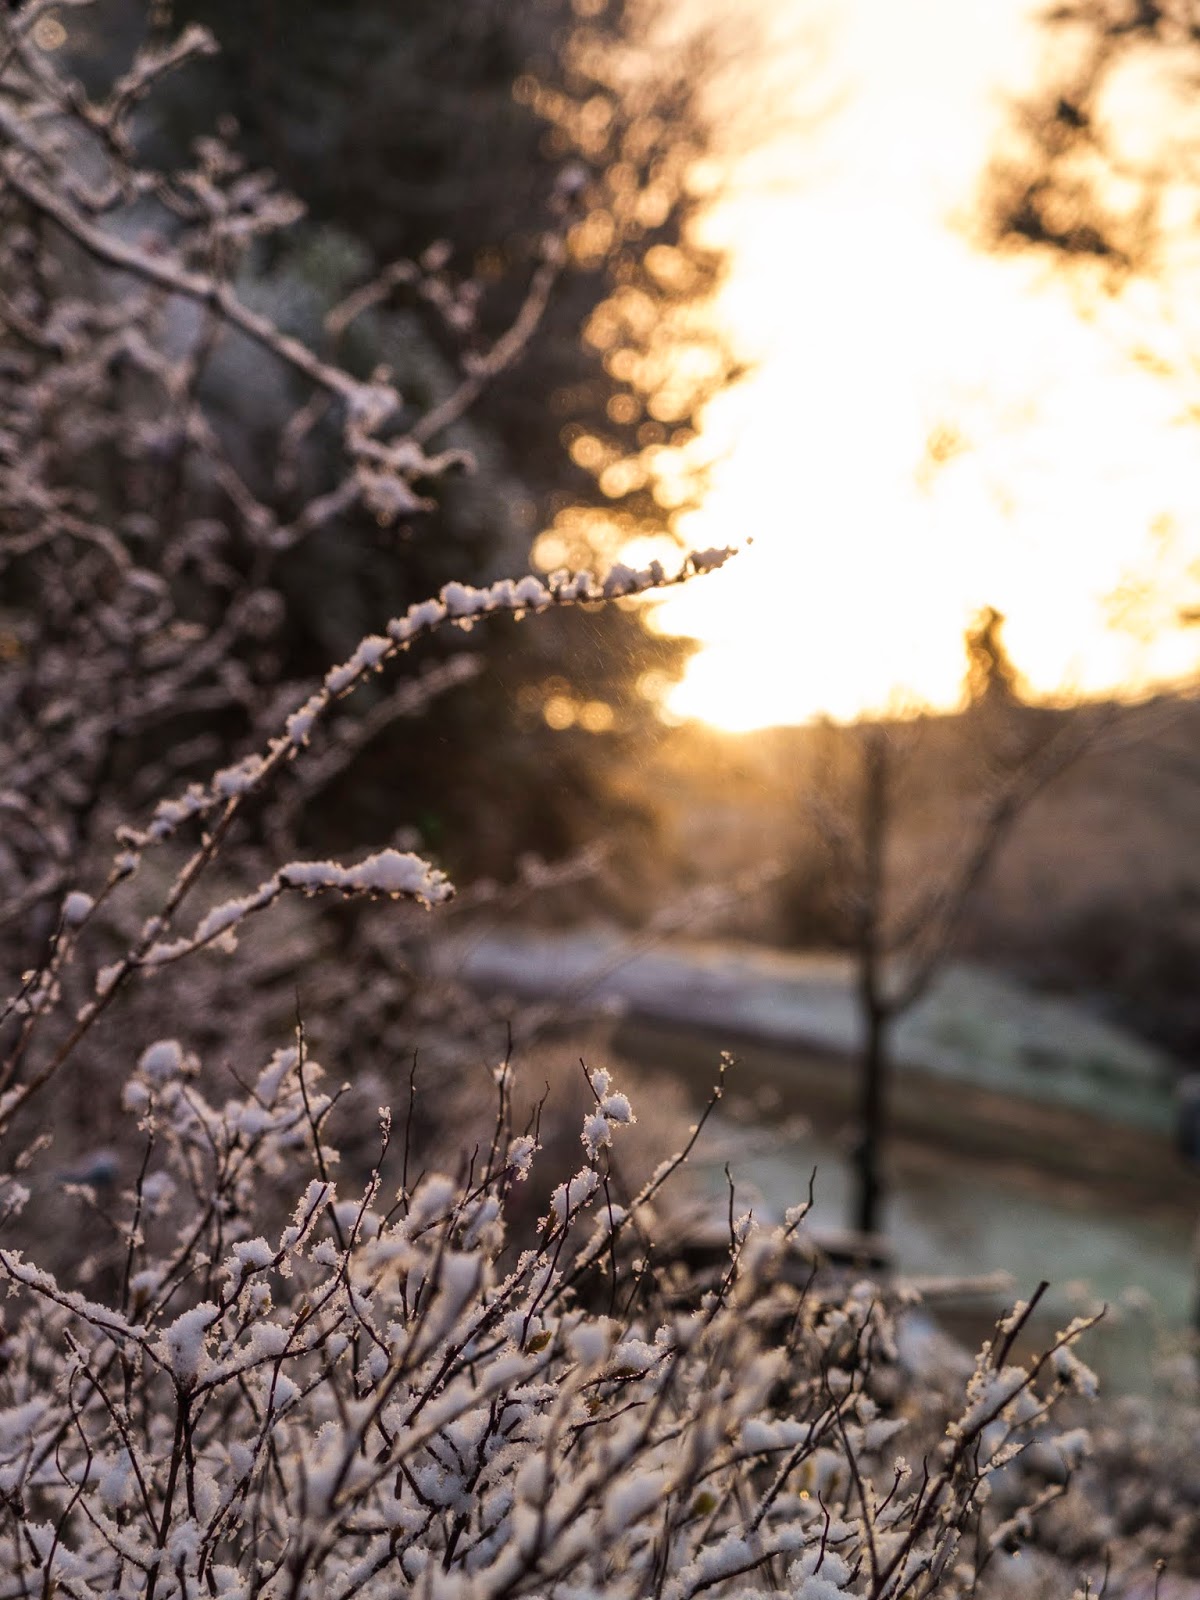 A close up of snow covered branches with a sunset glare in the background.